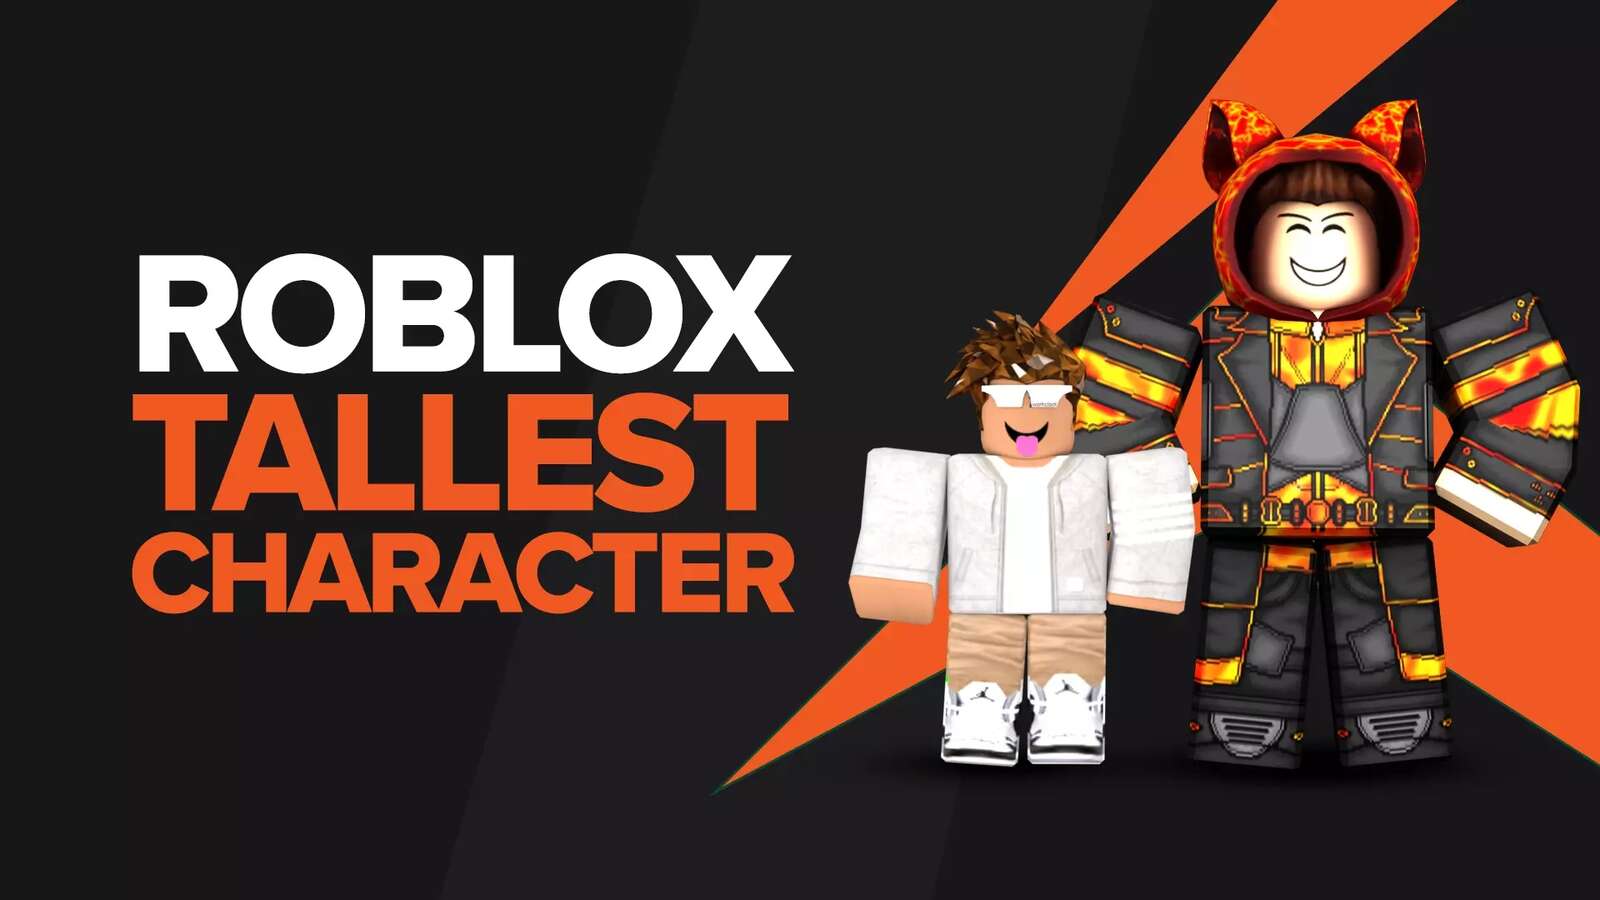 How to Make the Tallest Character In Roblox? What's the highest You can go?